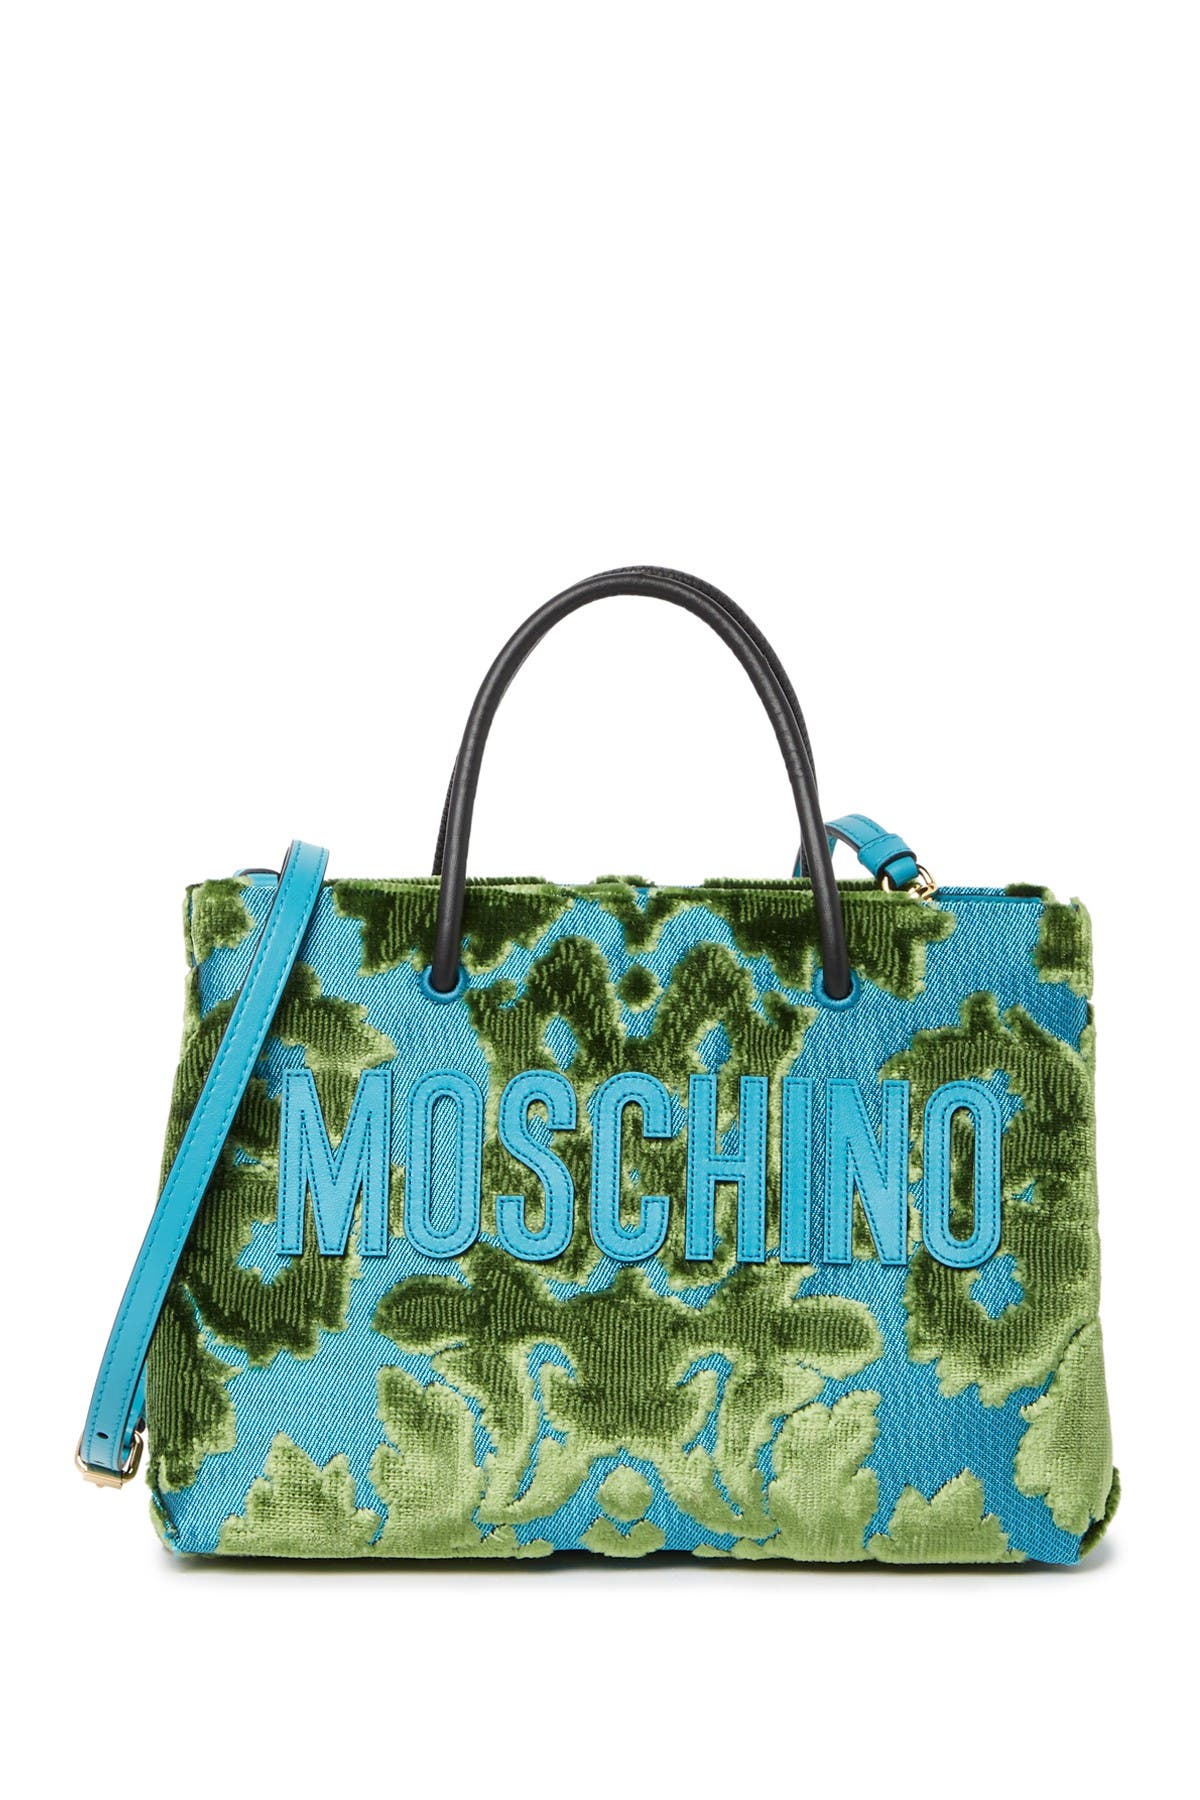 MOSCHINO | Printed Tote | Nordstrom Rack